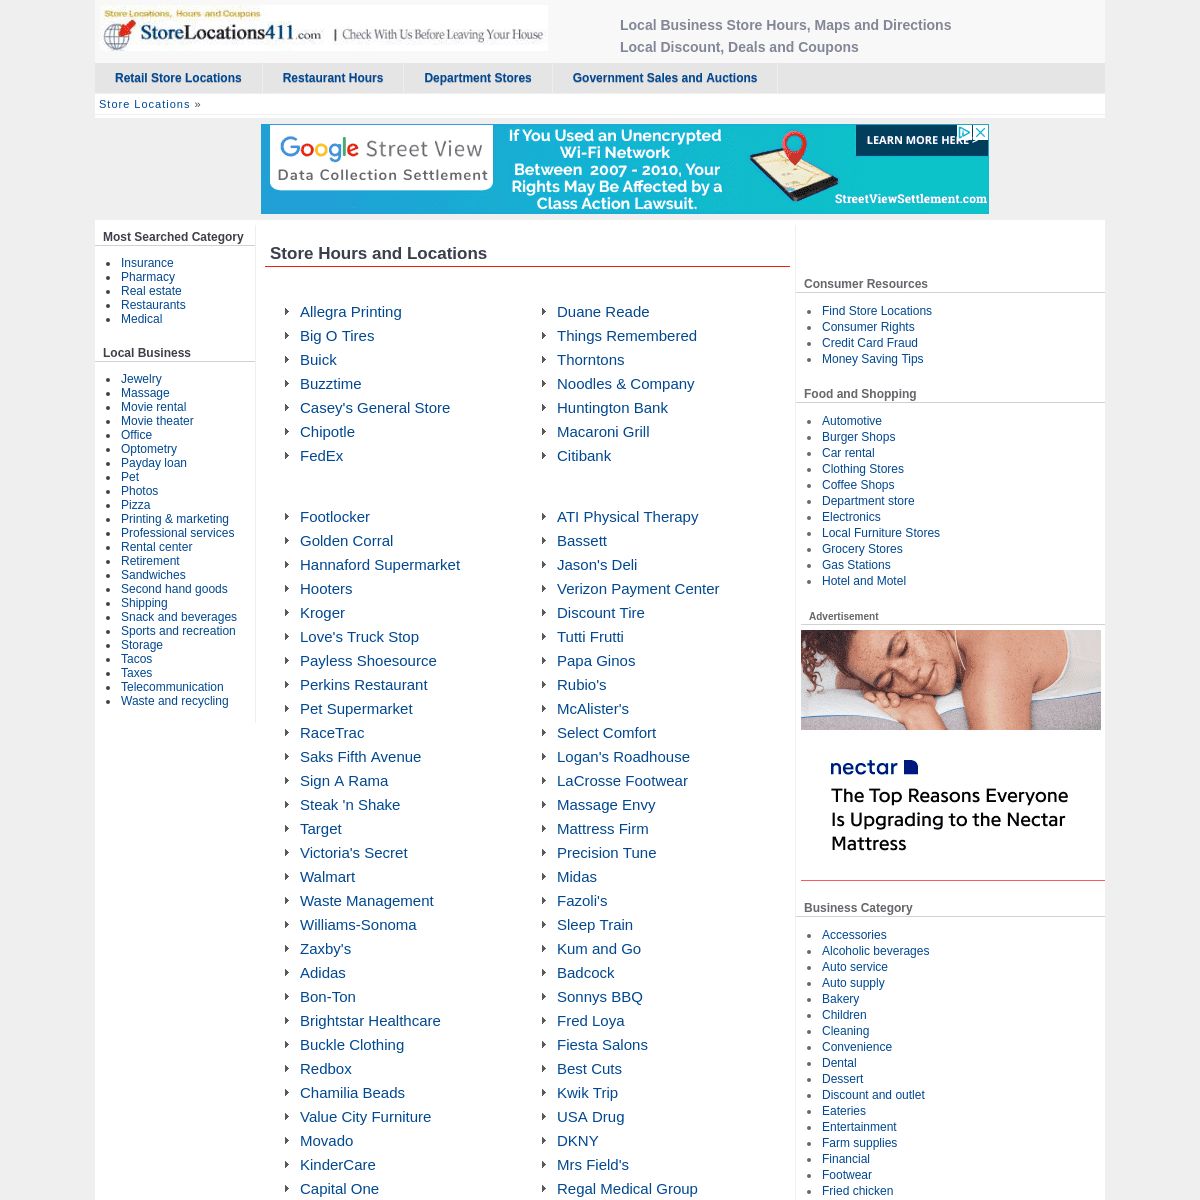 A complete backup of storelocations411.com